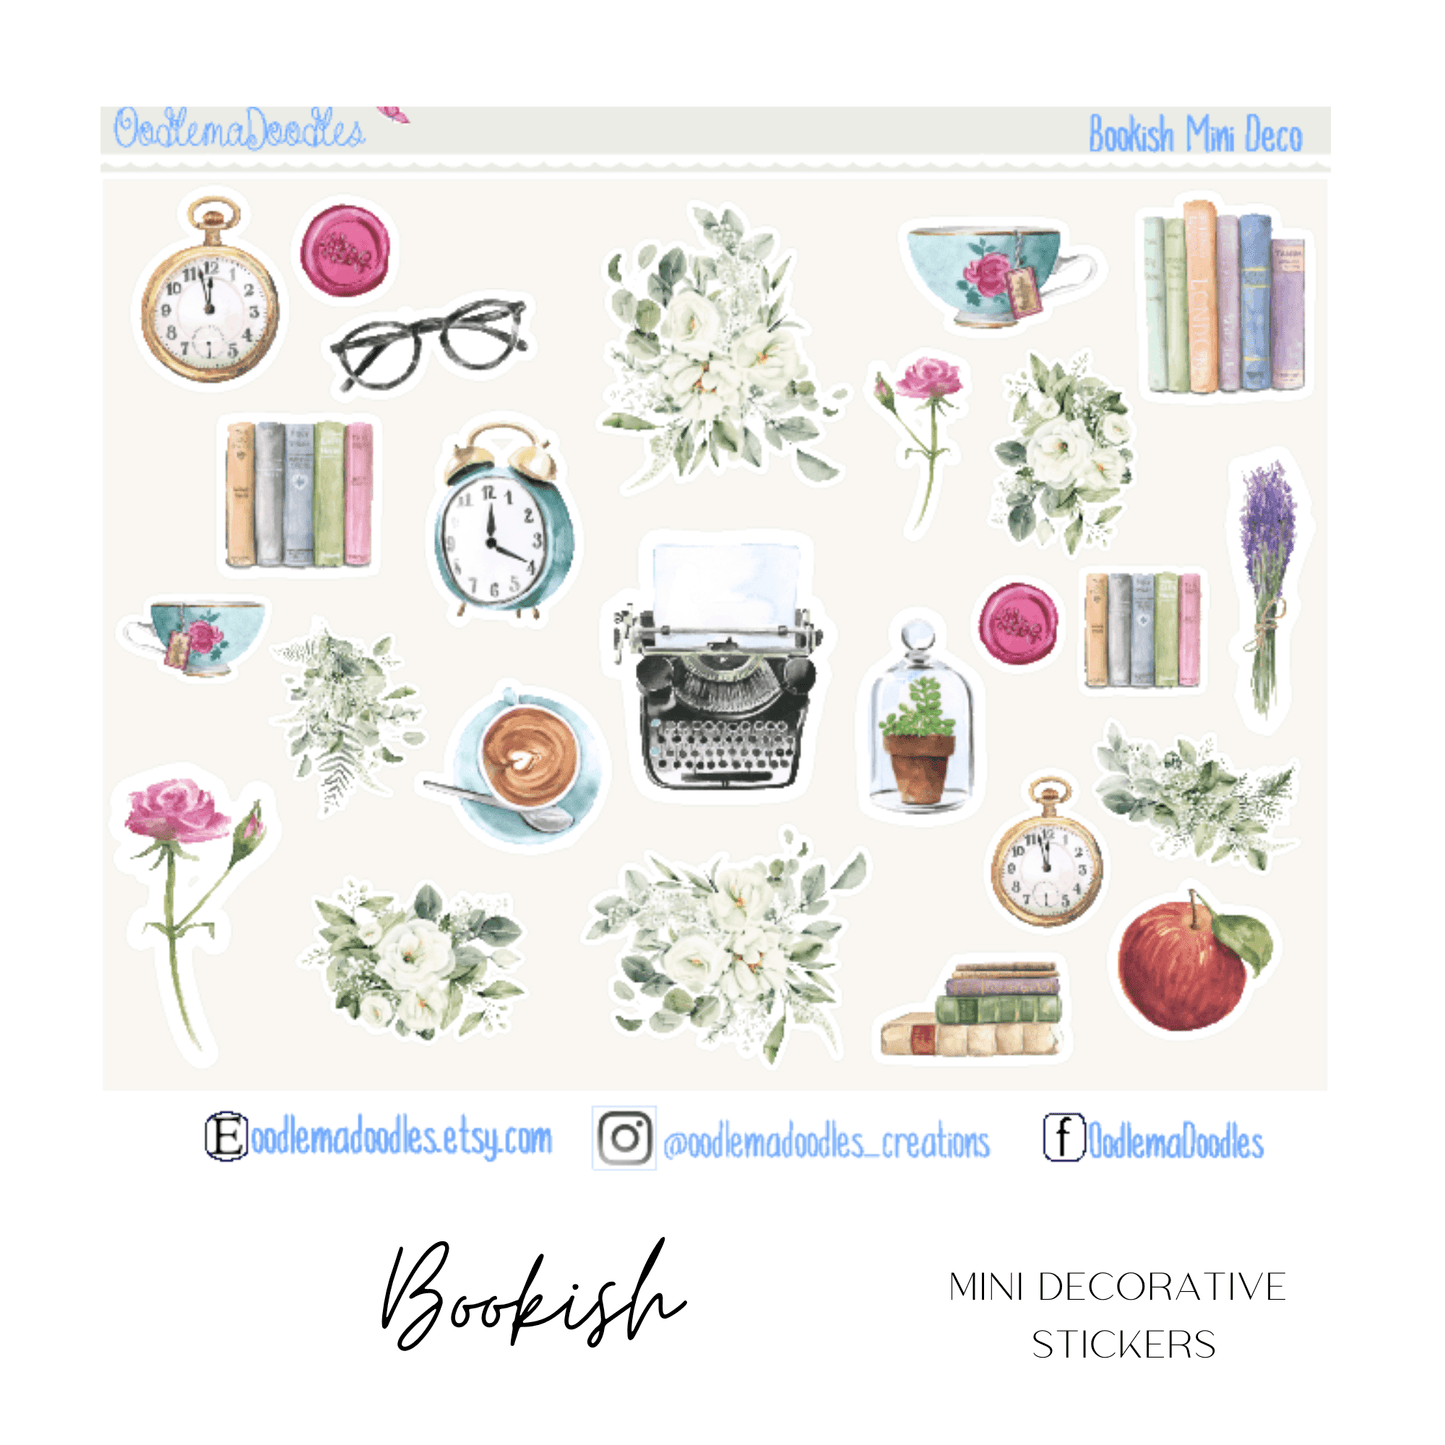 Bookish Mini Decorative Stickers - oodlemadoodles